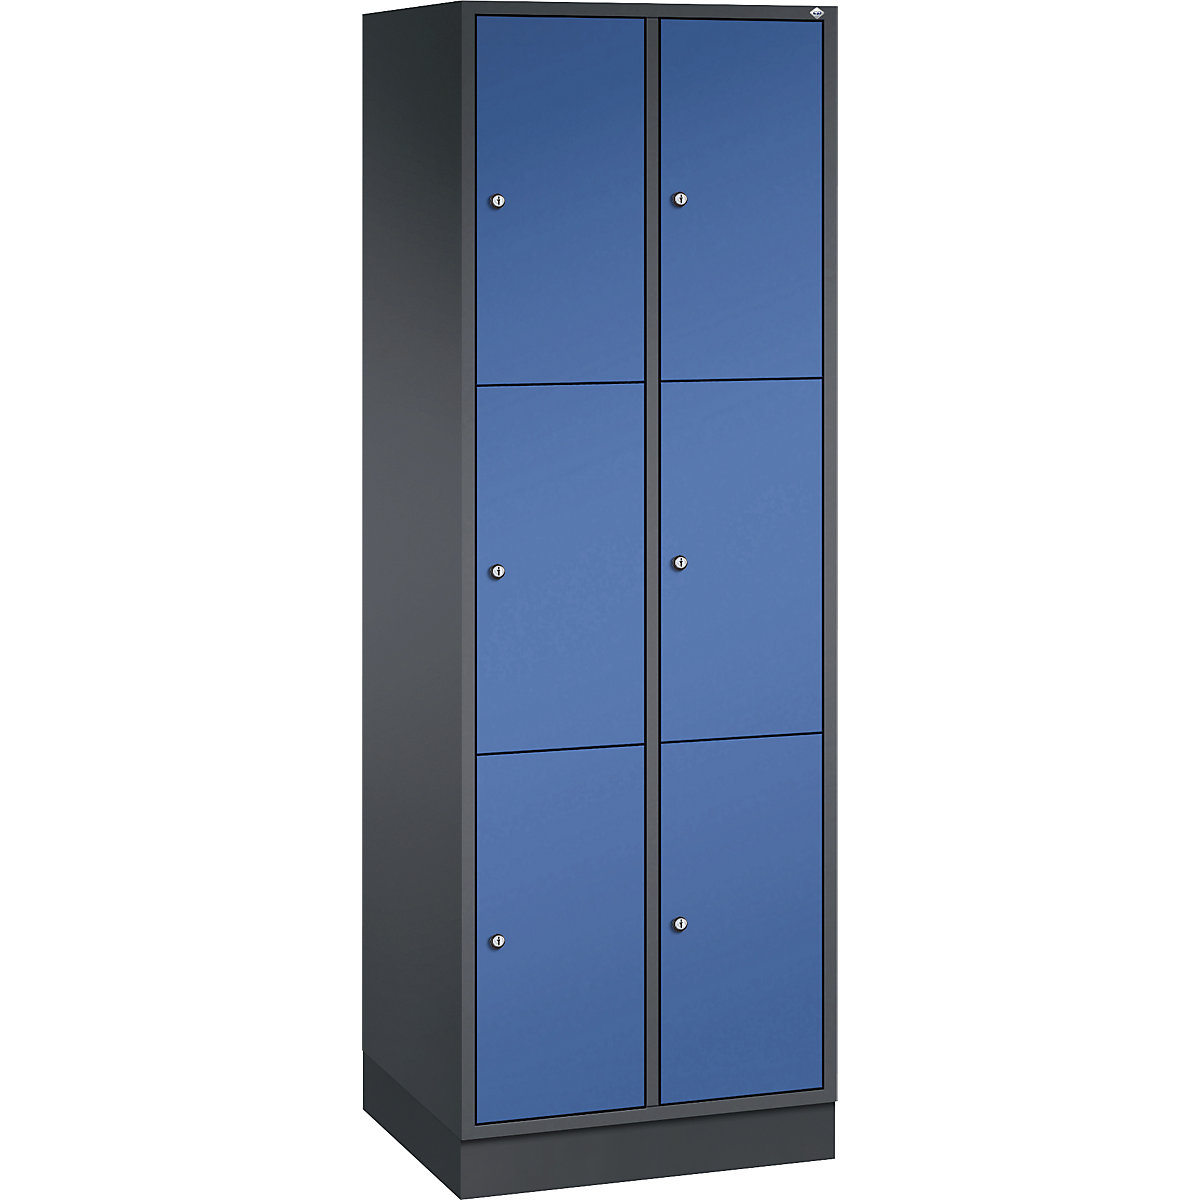 INTRO steel compartment locker, compartment height 580 mm – C+P, WxD 620 x 500 mm, 6 compartments, black grey body, gentian blue doors